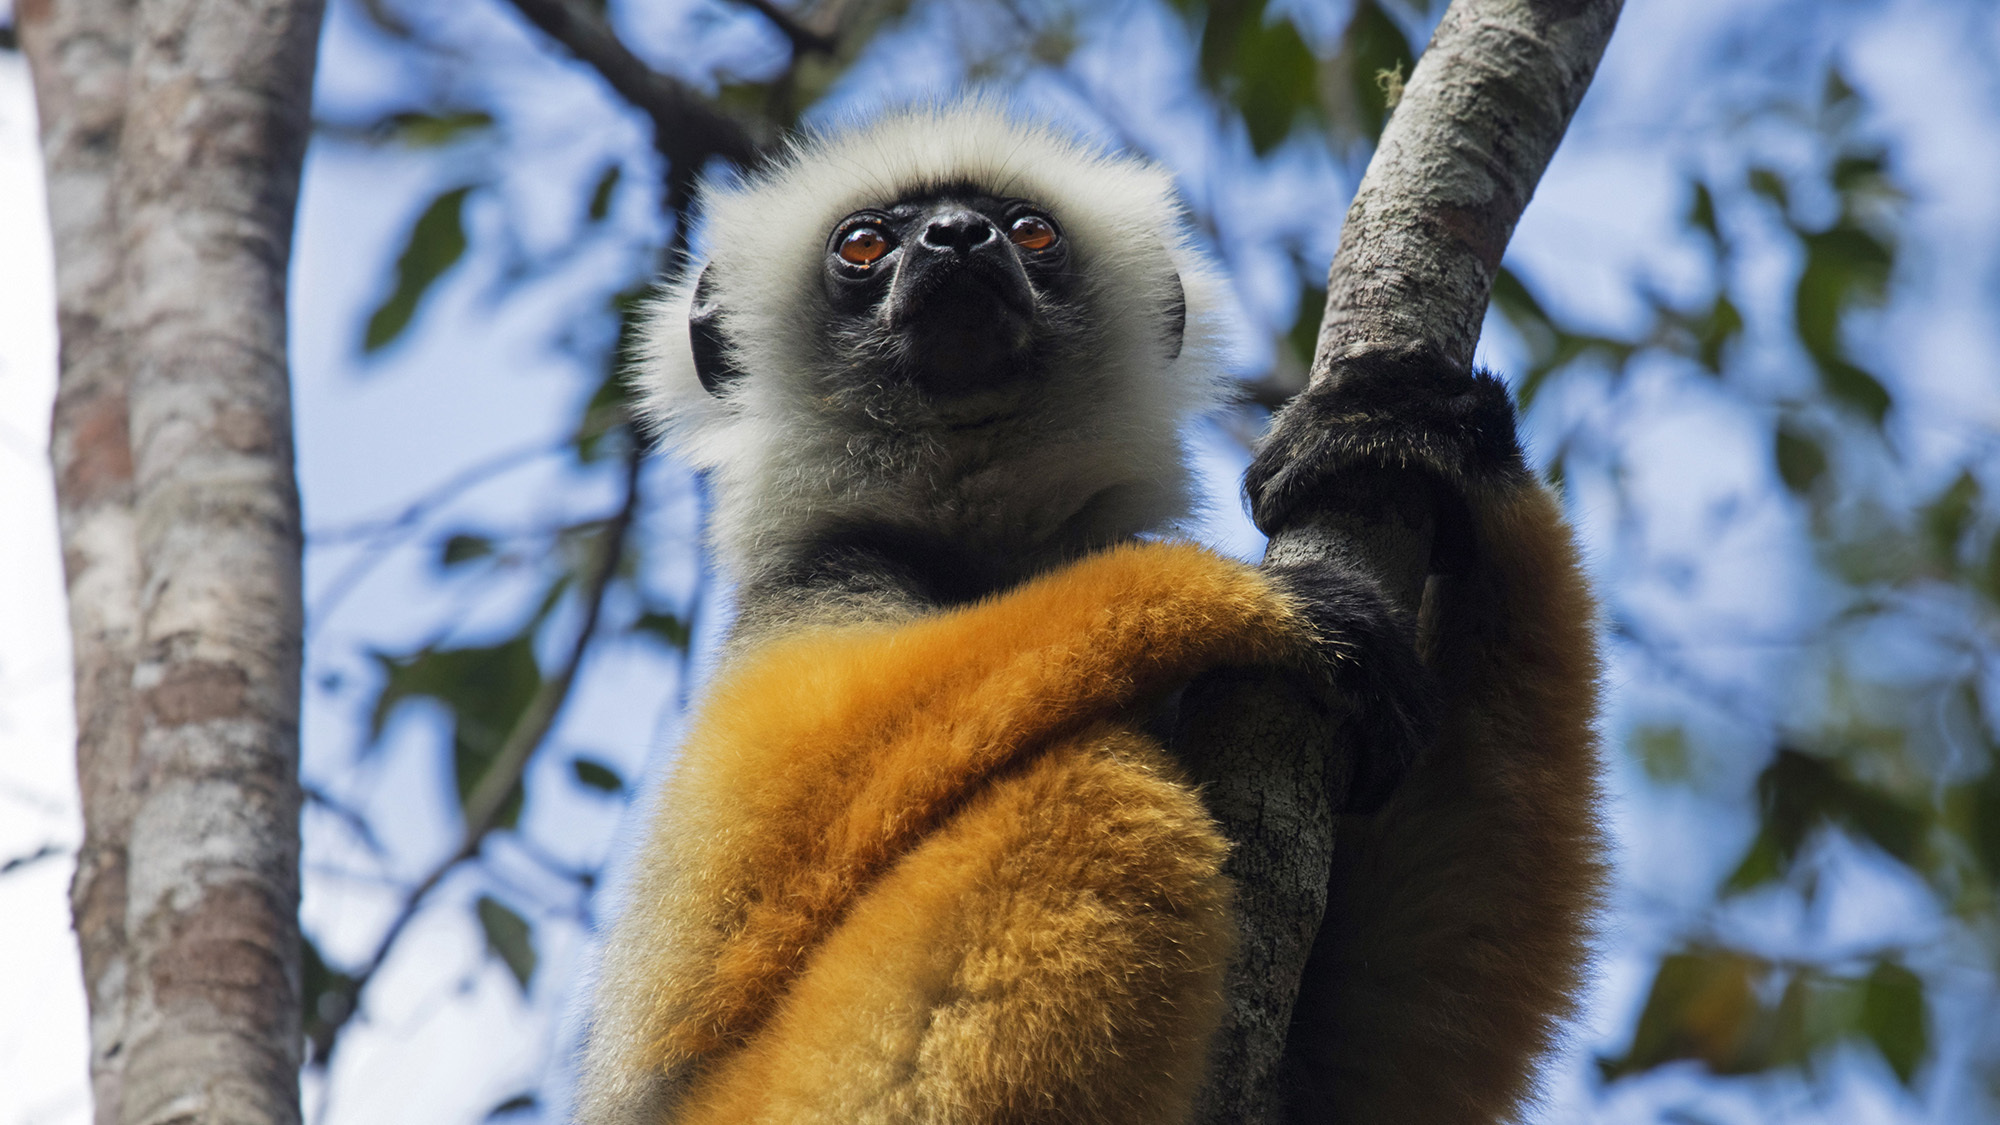 an orange, black, and white lemur sits in a tree